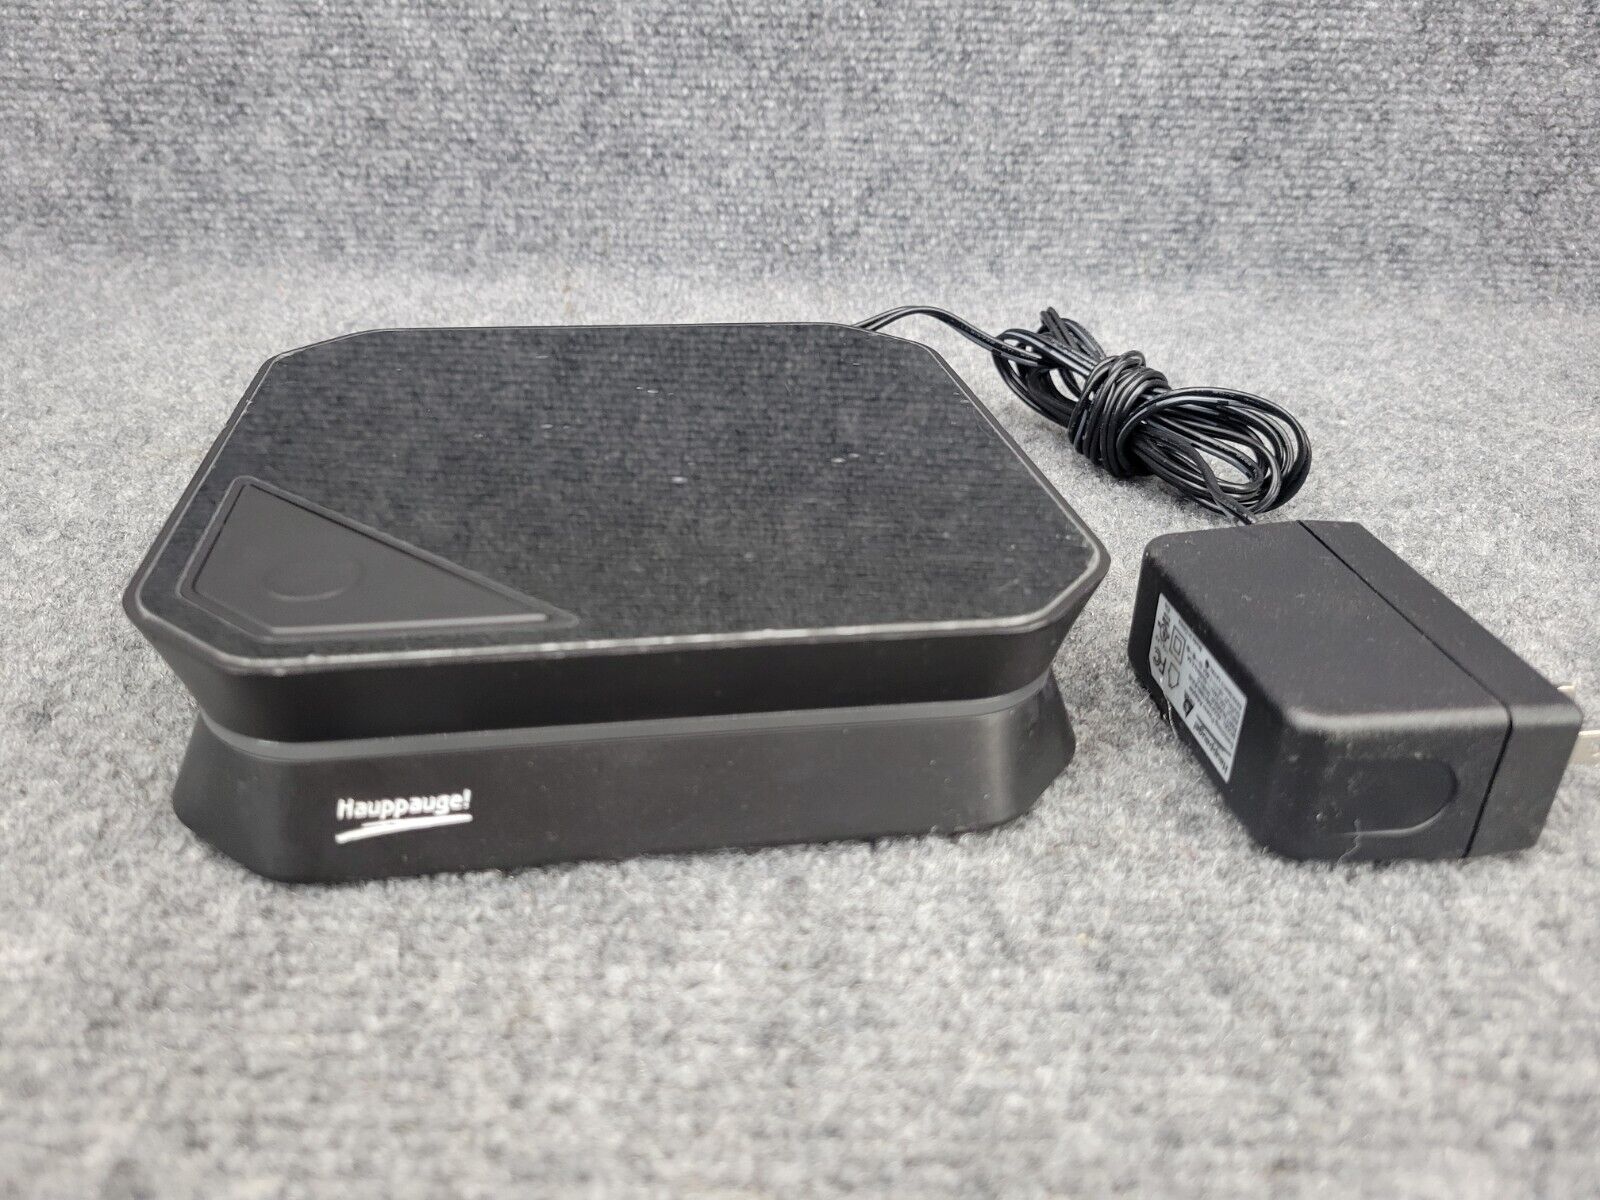 GAMING TV Hauppauge HD PVR 2 Video Capture Device - works great 